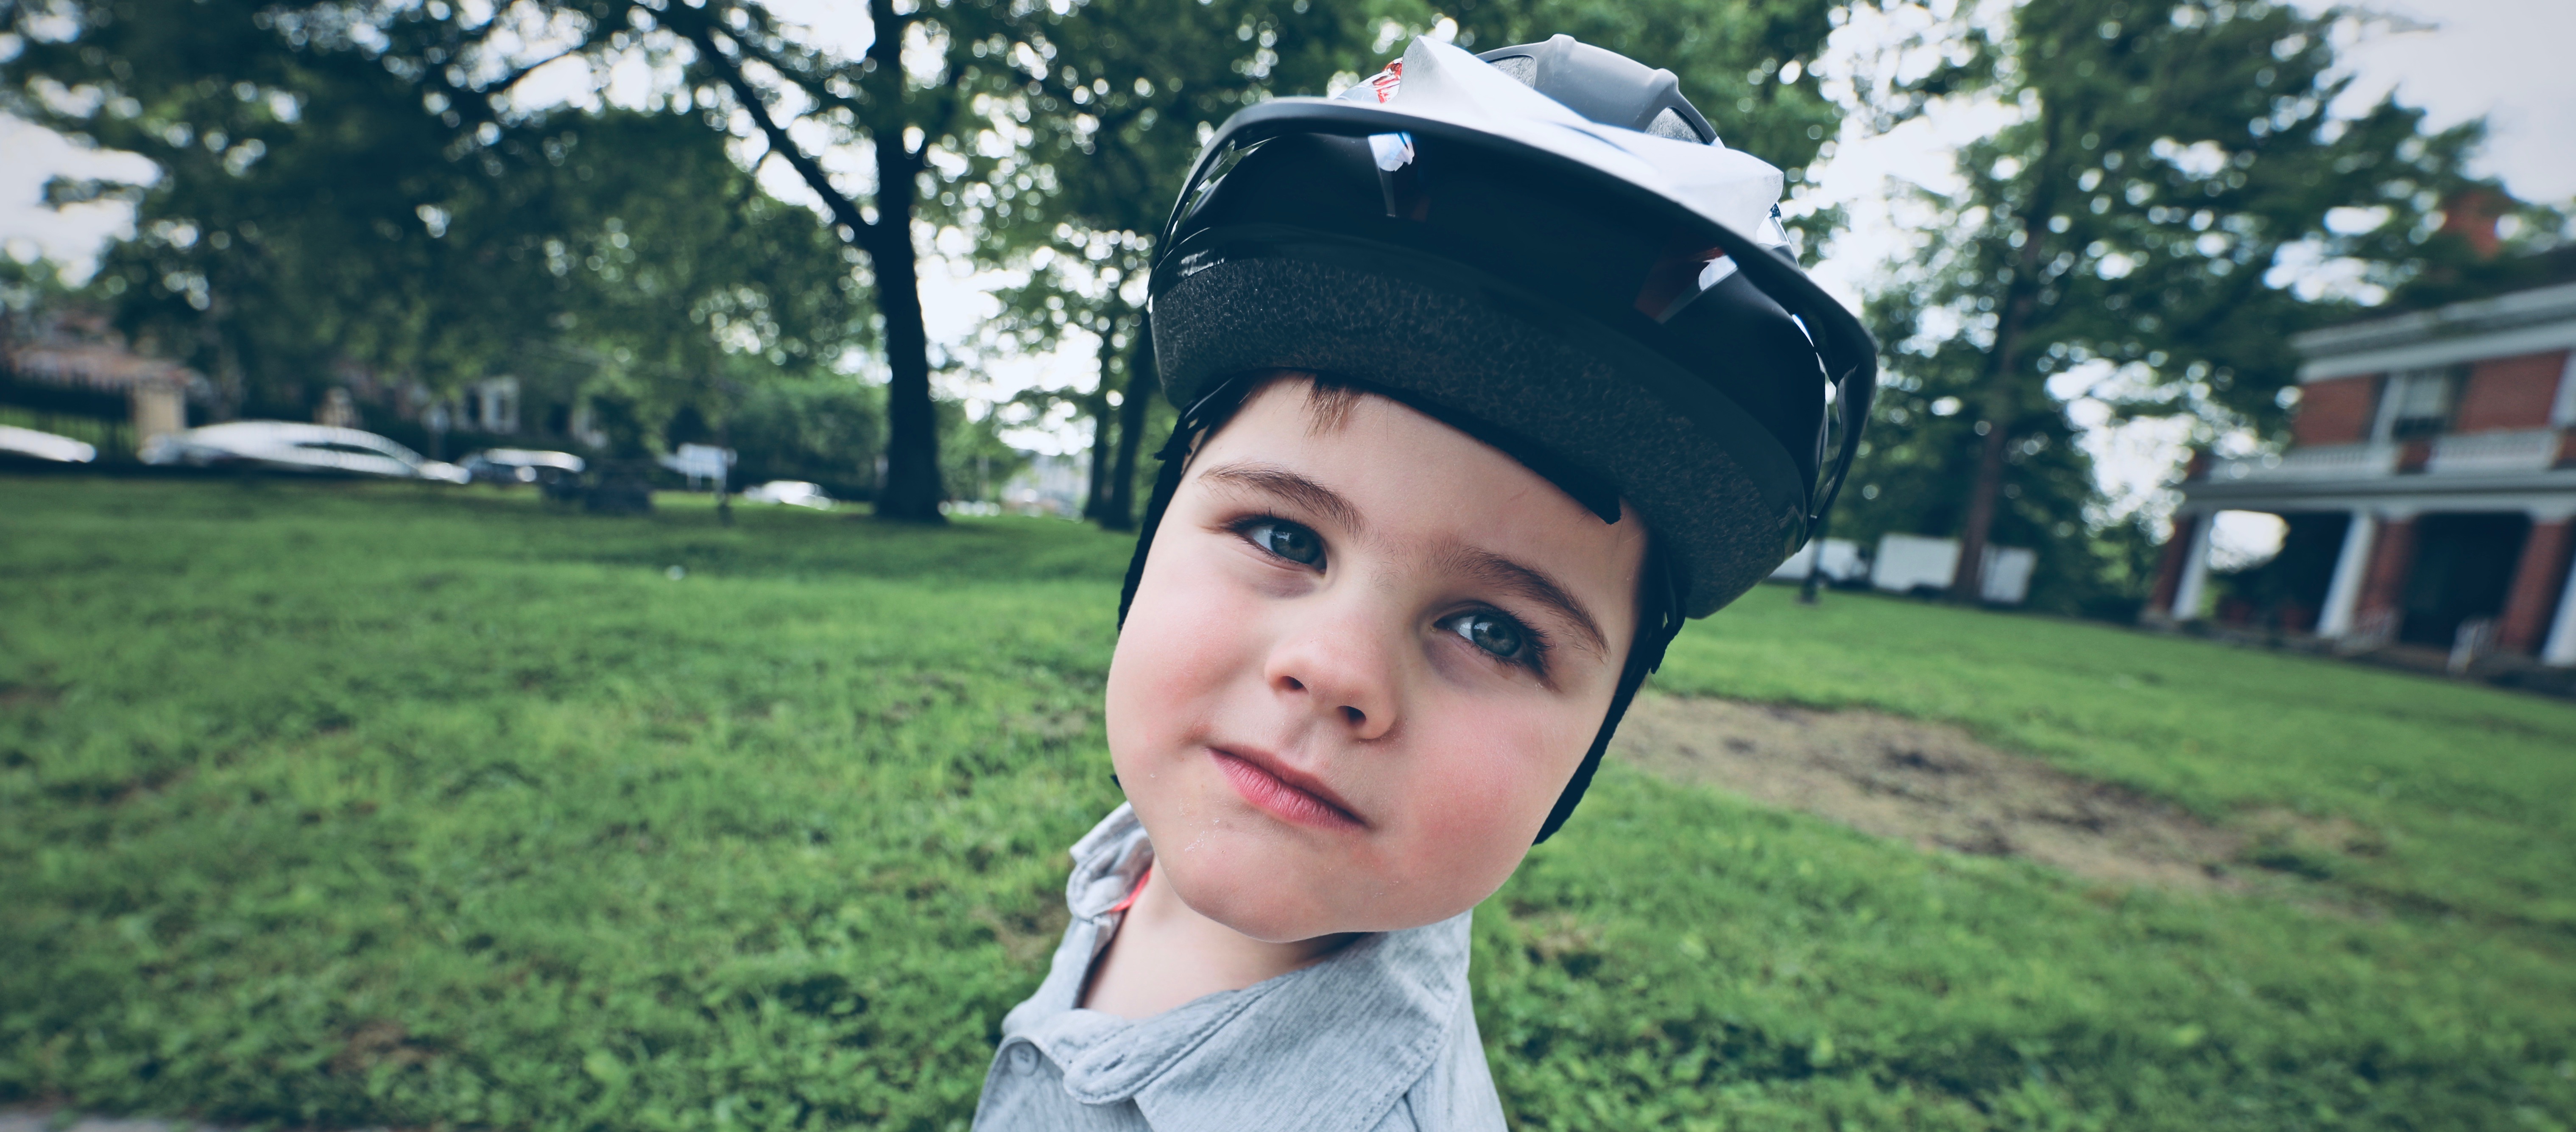 A Guide to Picking the Right Helmet For Kids